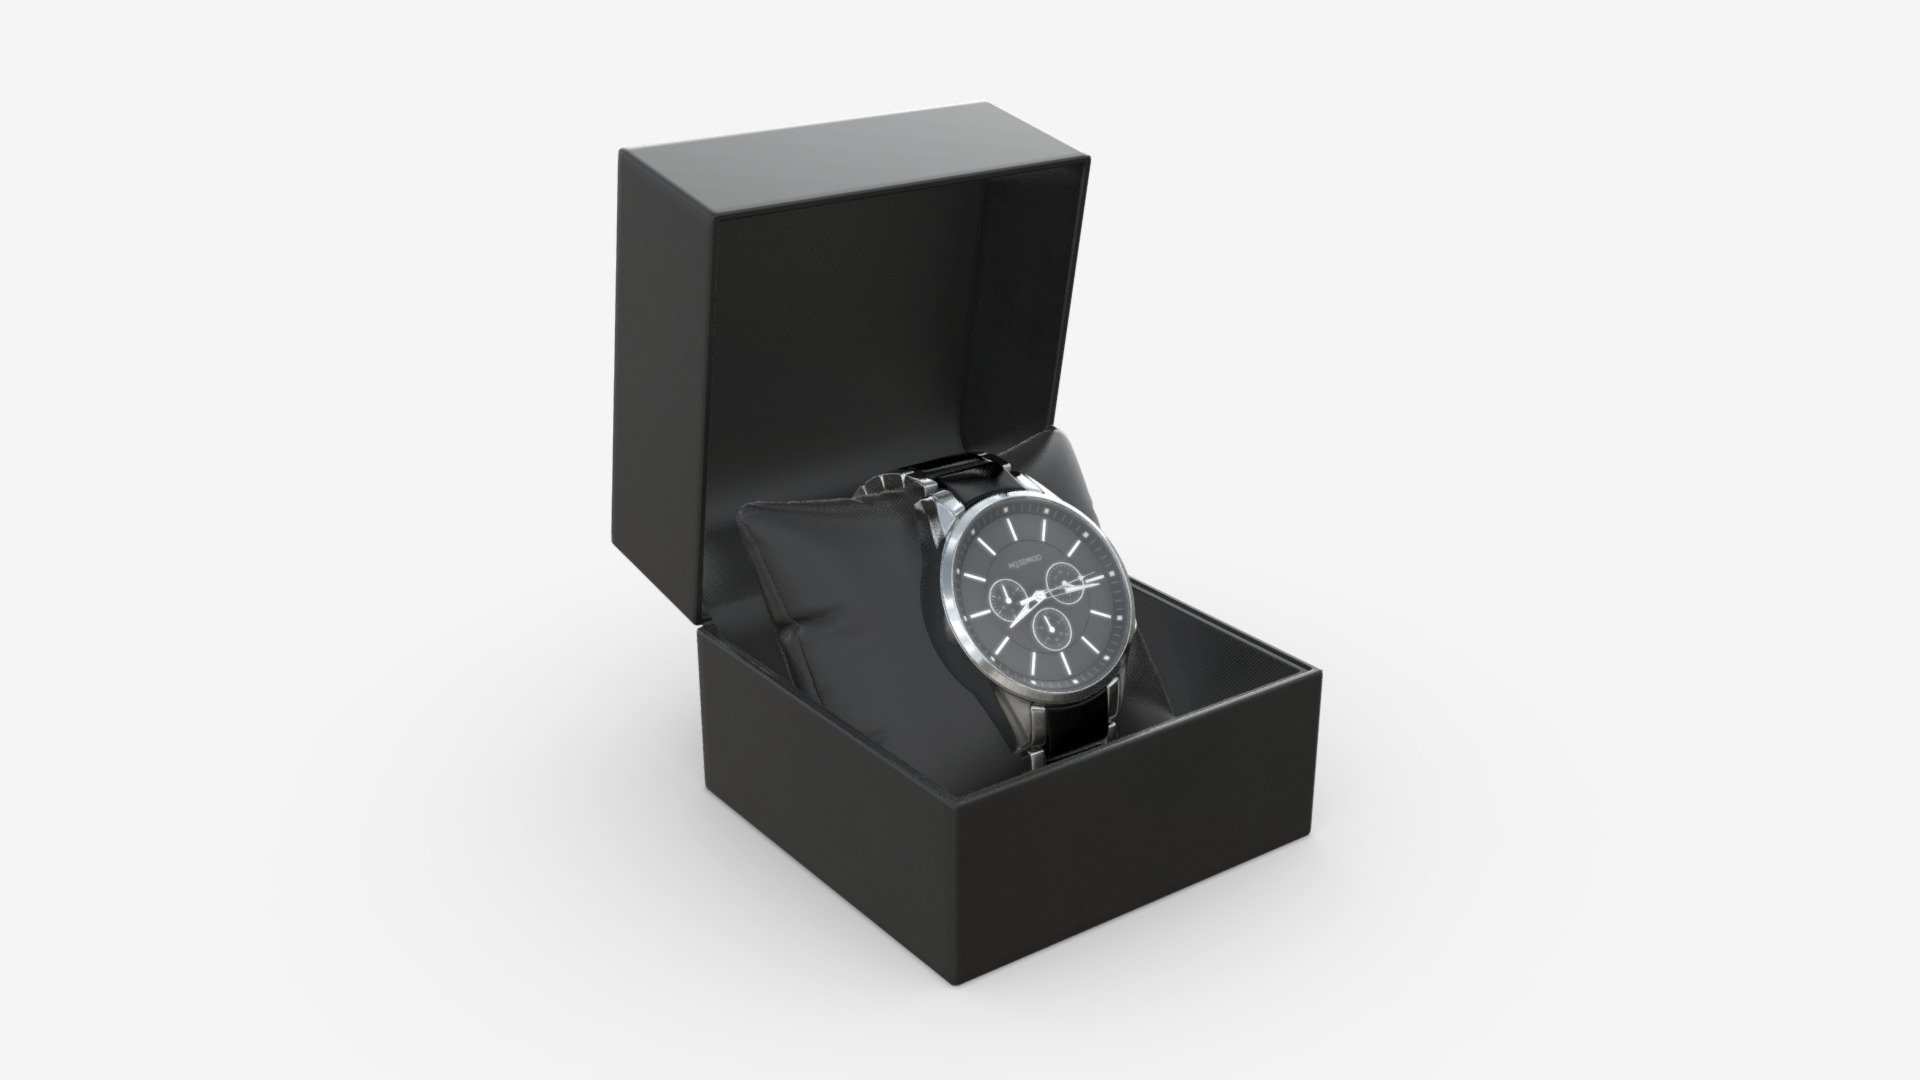 Wristwatch with Steel Bracelet in box 01 - Buy Royalty Free 3D model by HQ3DMOD (@AivisAstics) 3d model